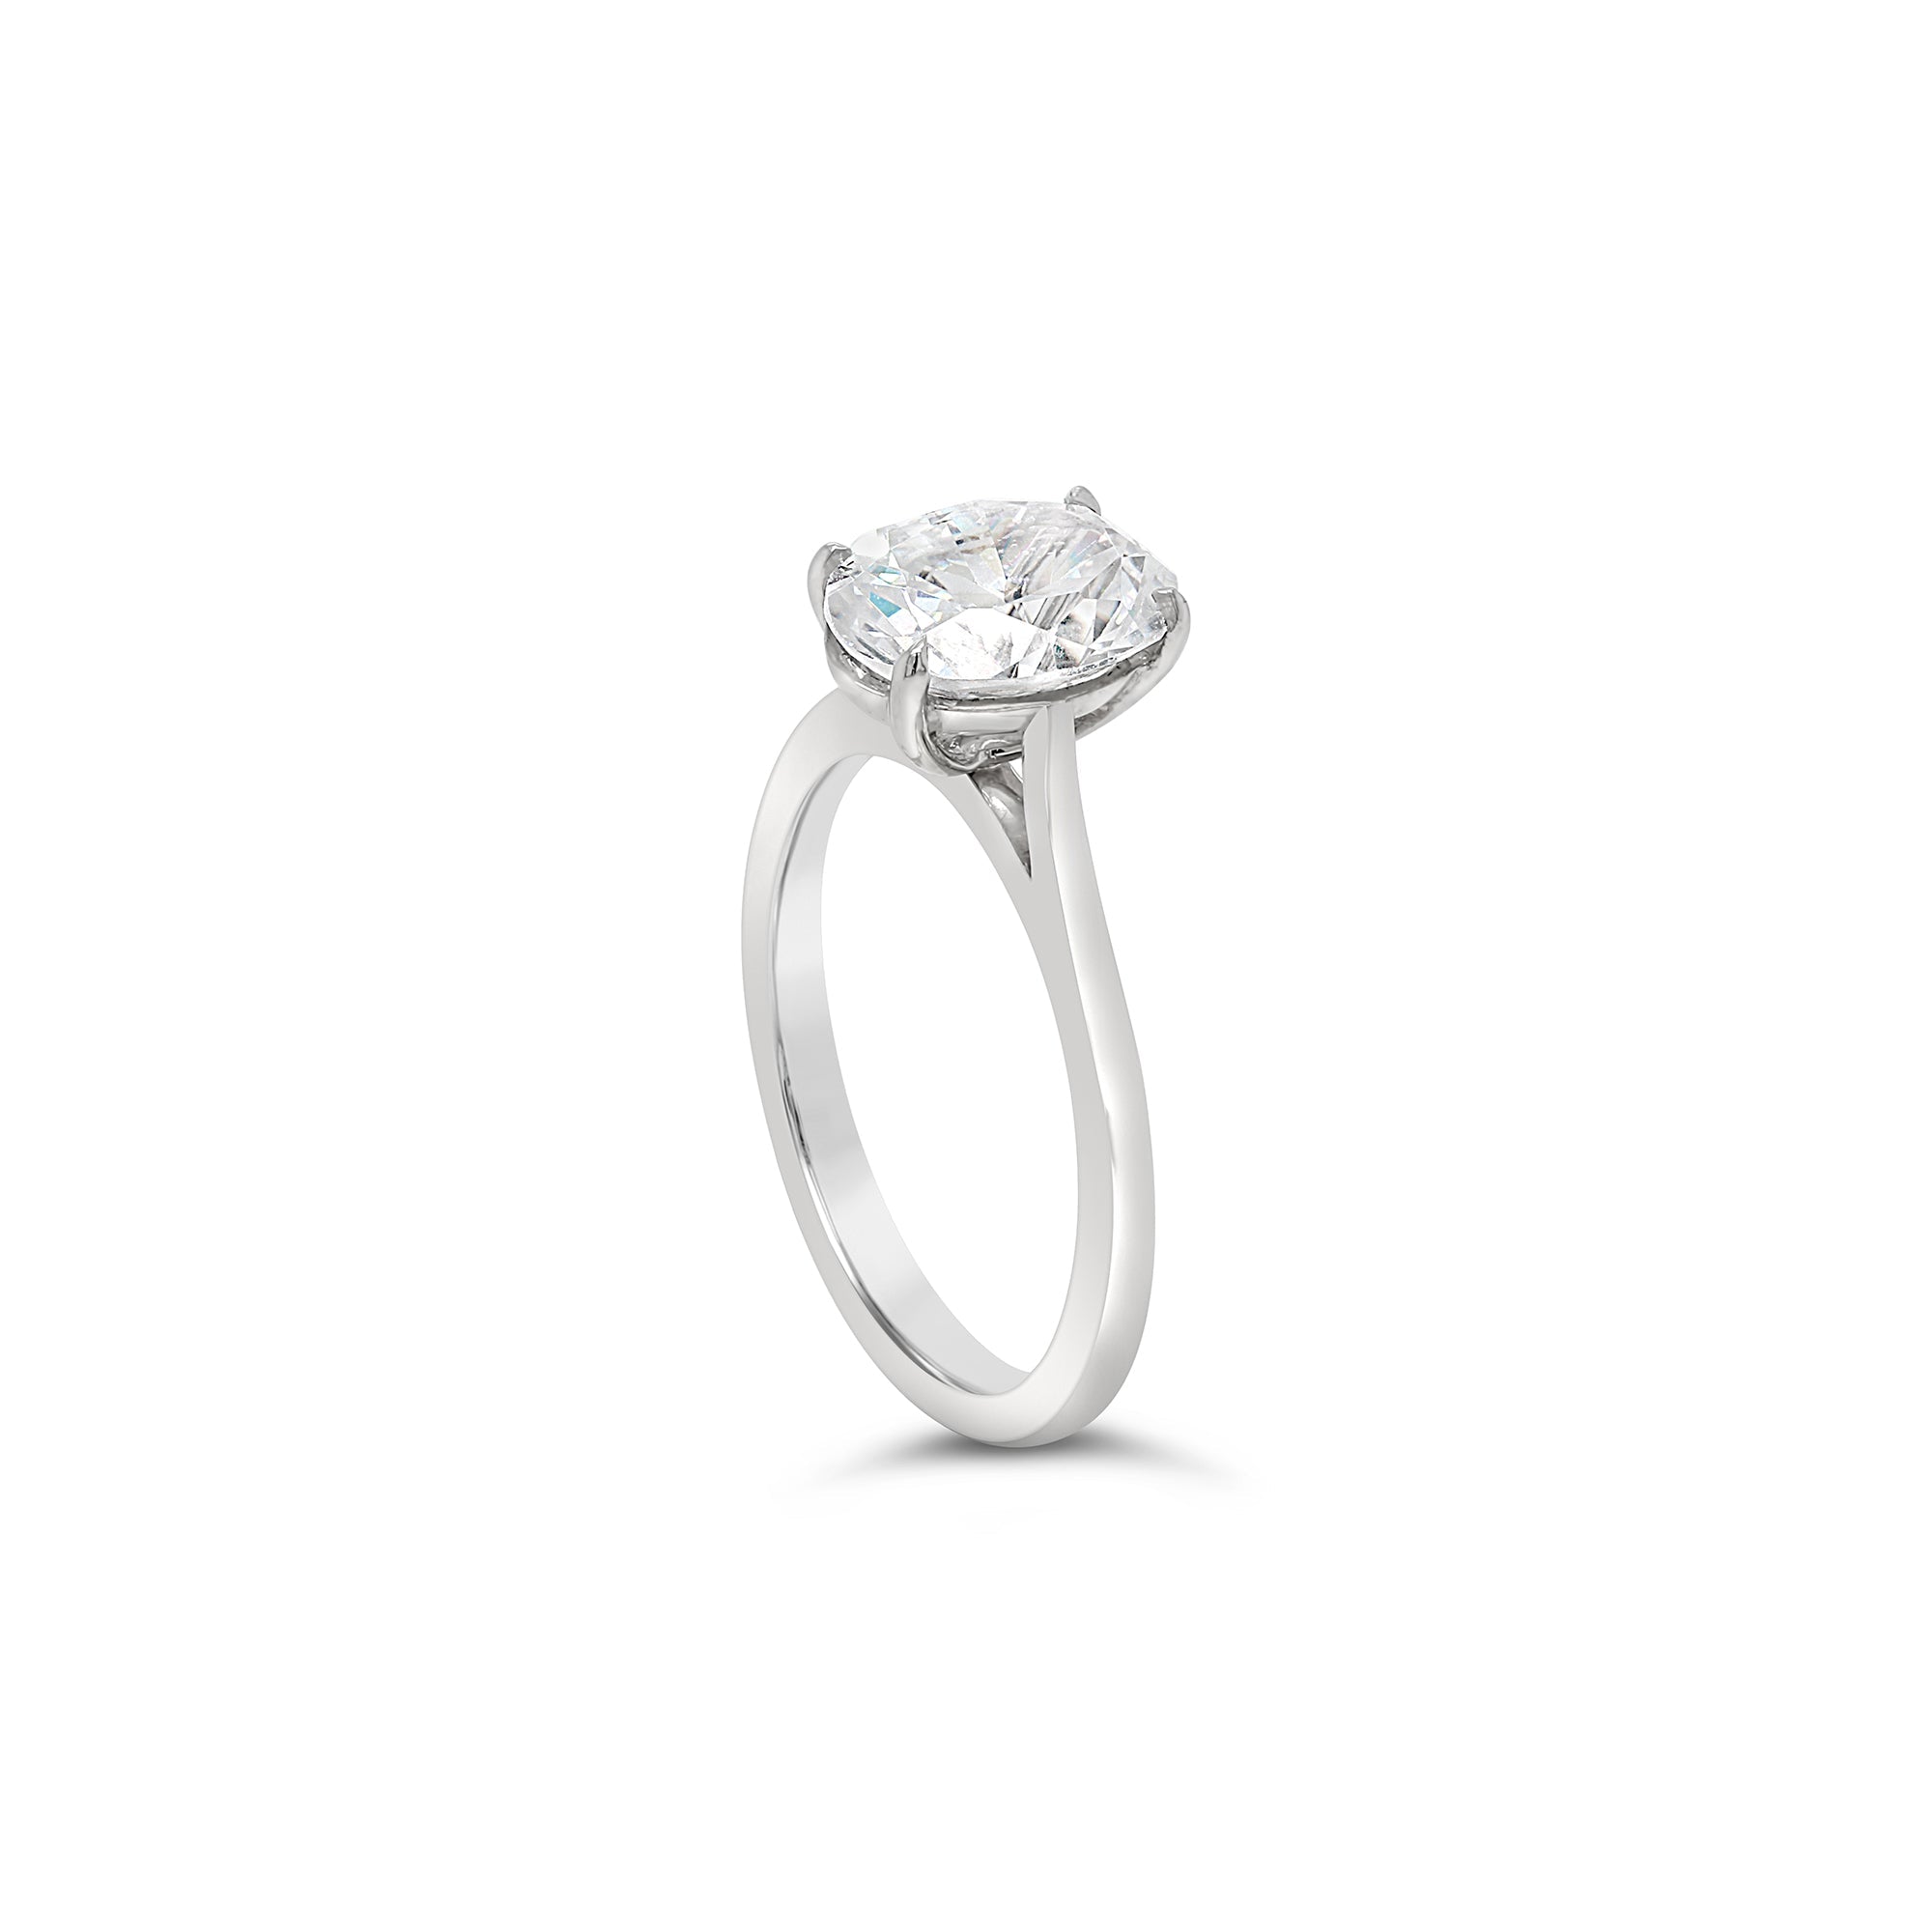 Oval Cut Solitaire Diamond Engagement Ring White Gold